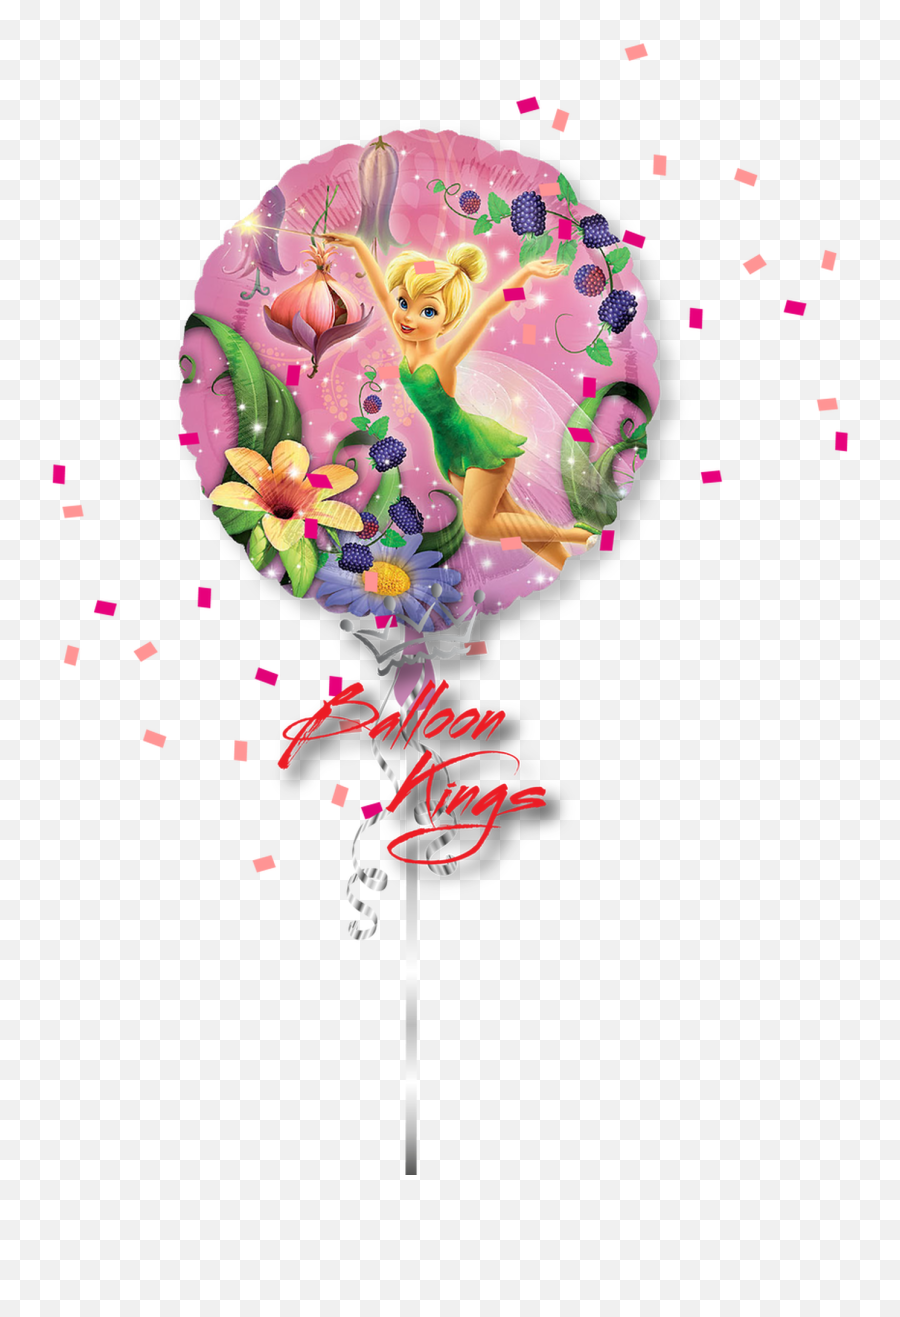 Tinker Bell Round D - Tinkerbell Balloons Png Hd,Tinker Bell Png